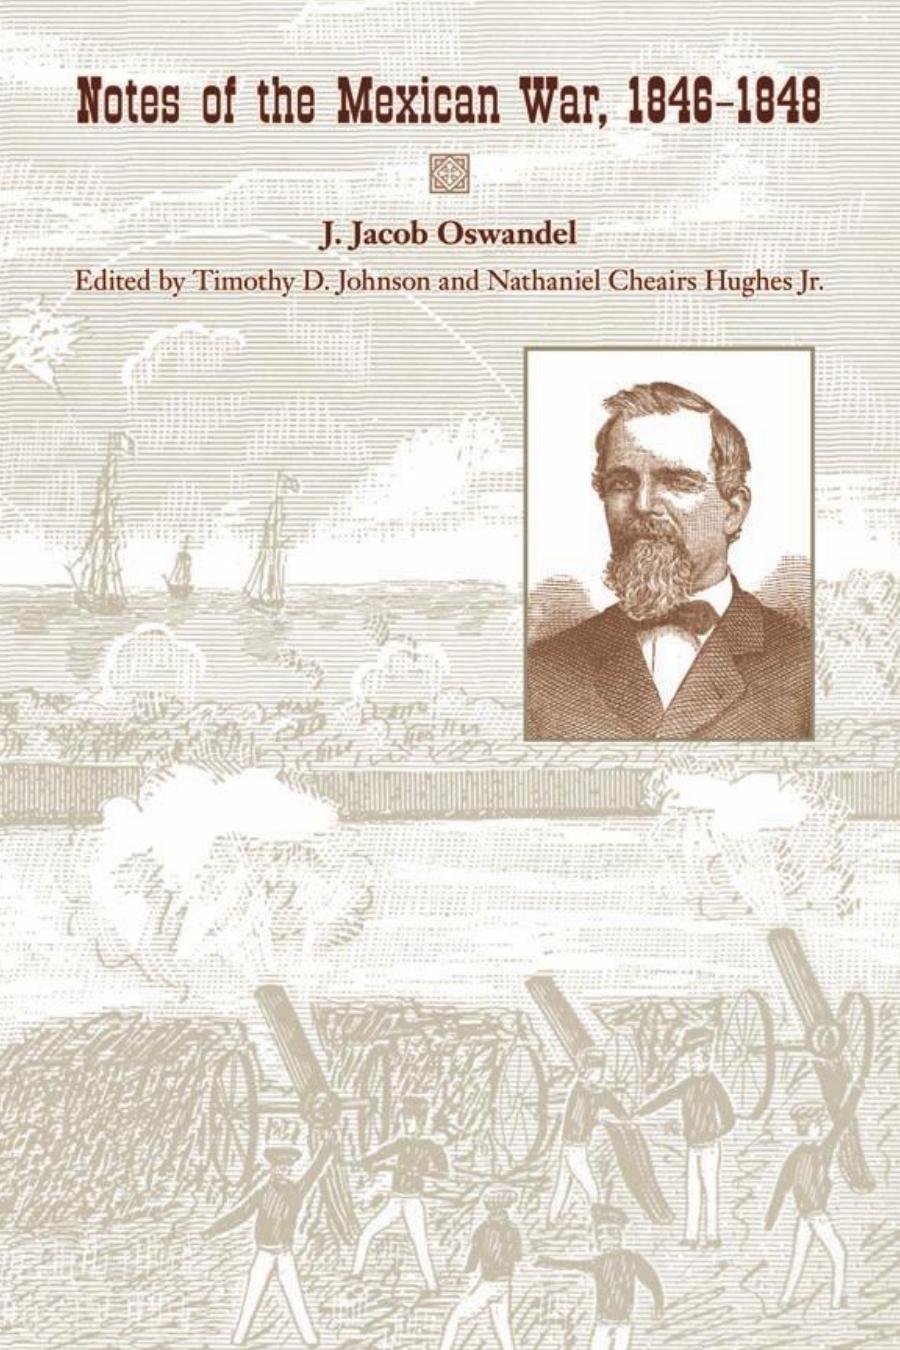 Notes of the Mexican War, 1846-1848 by J. Jacob Oswandel